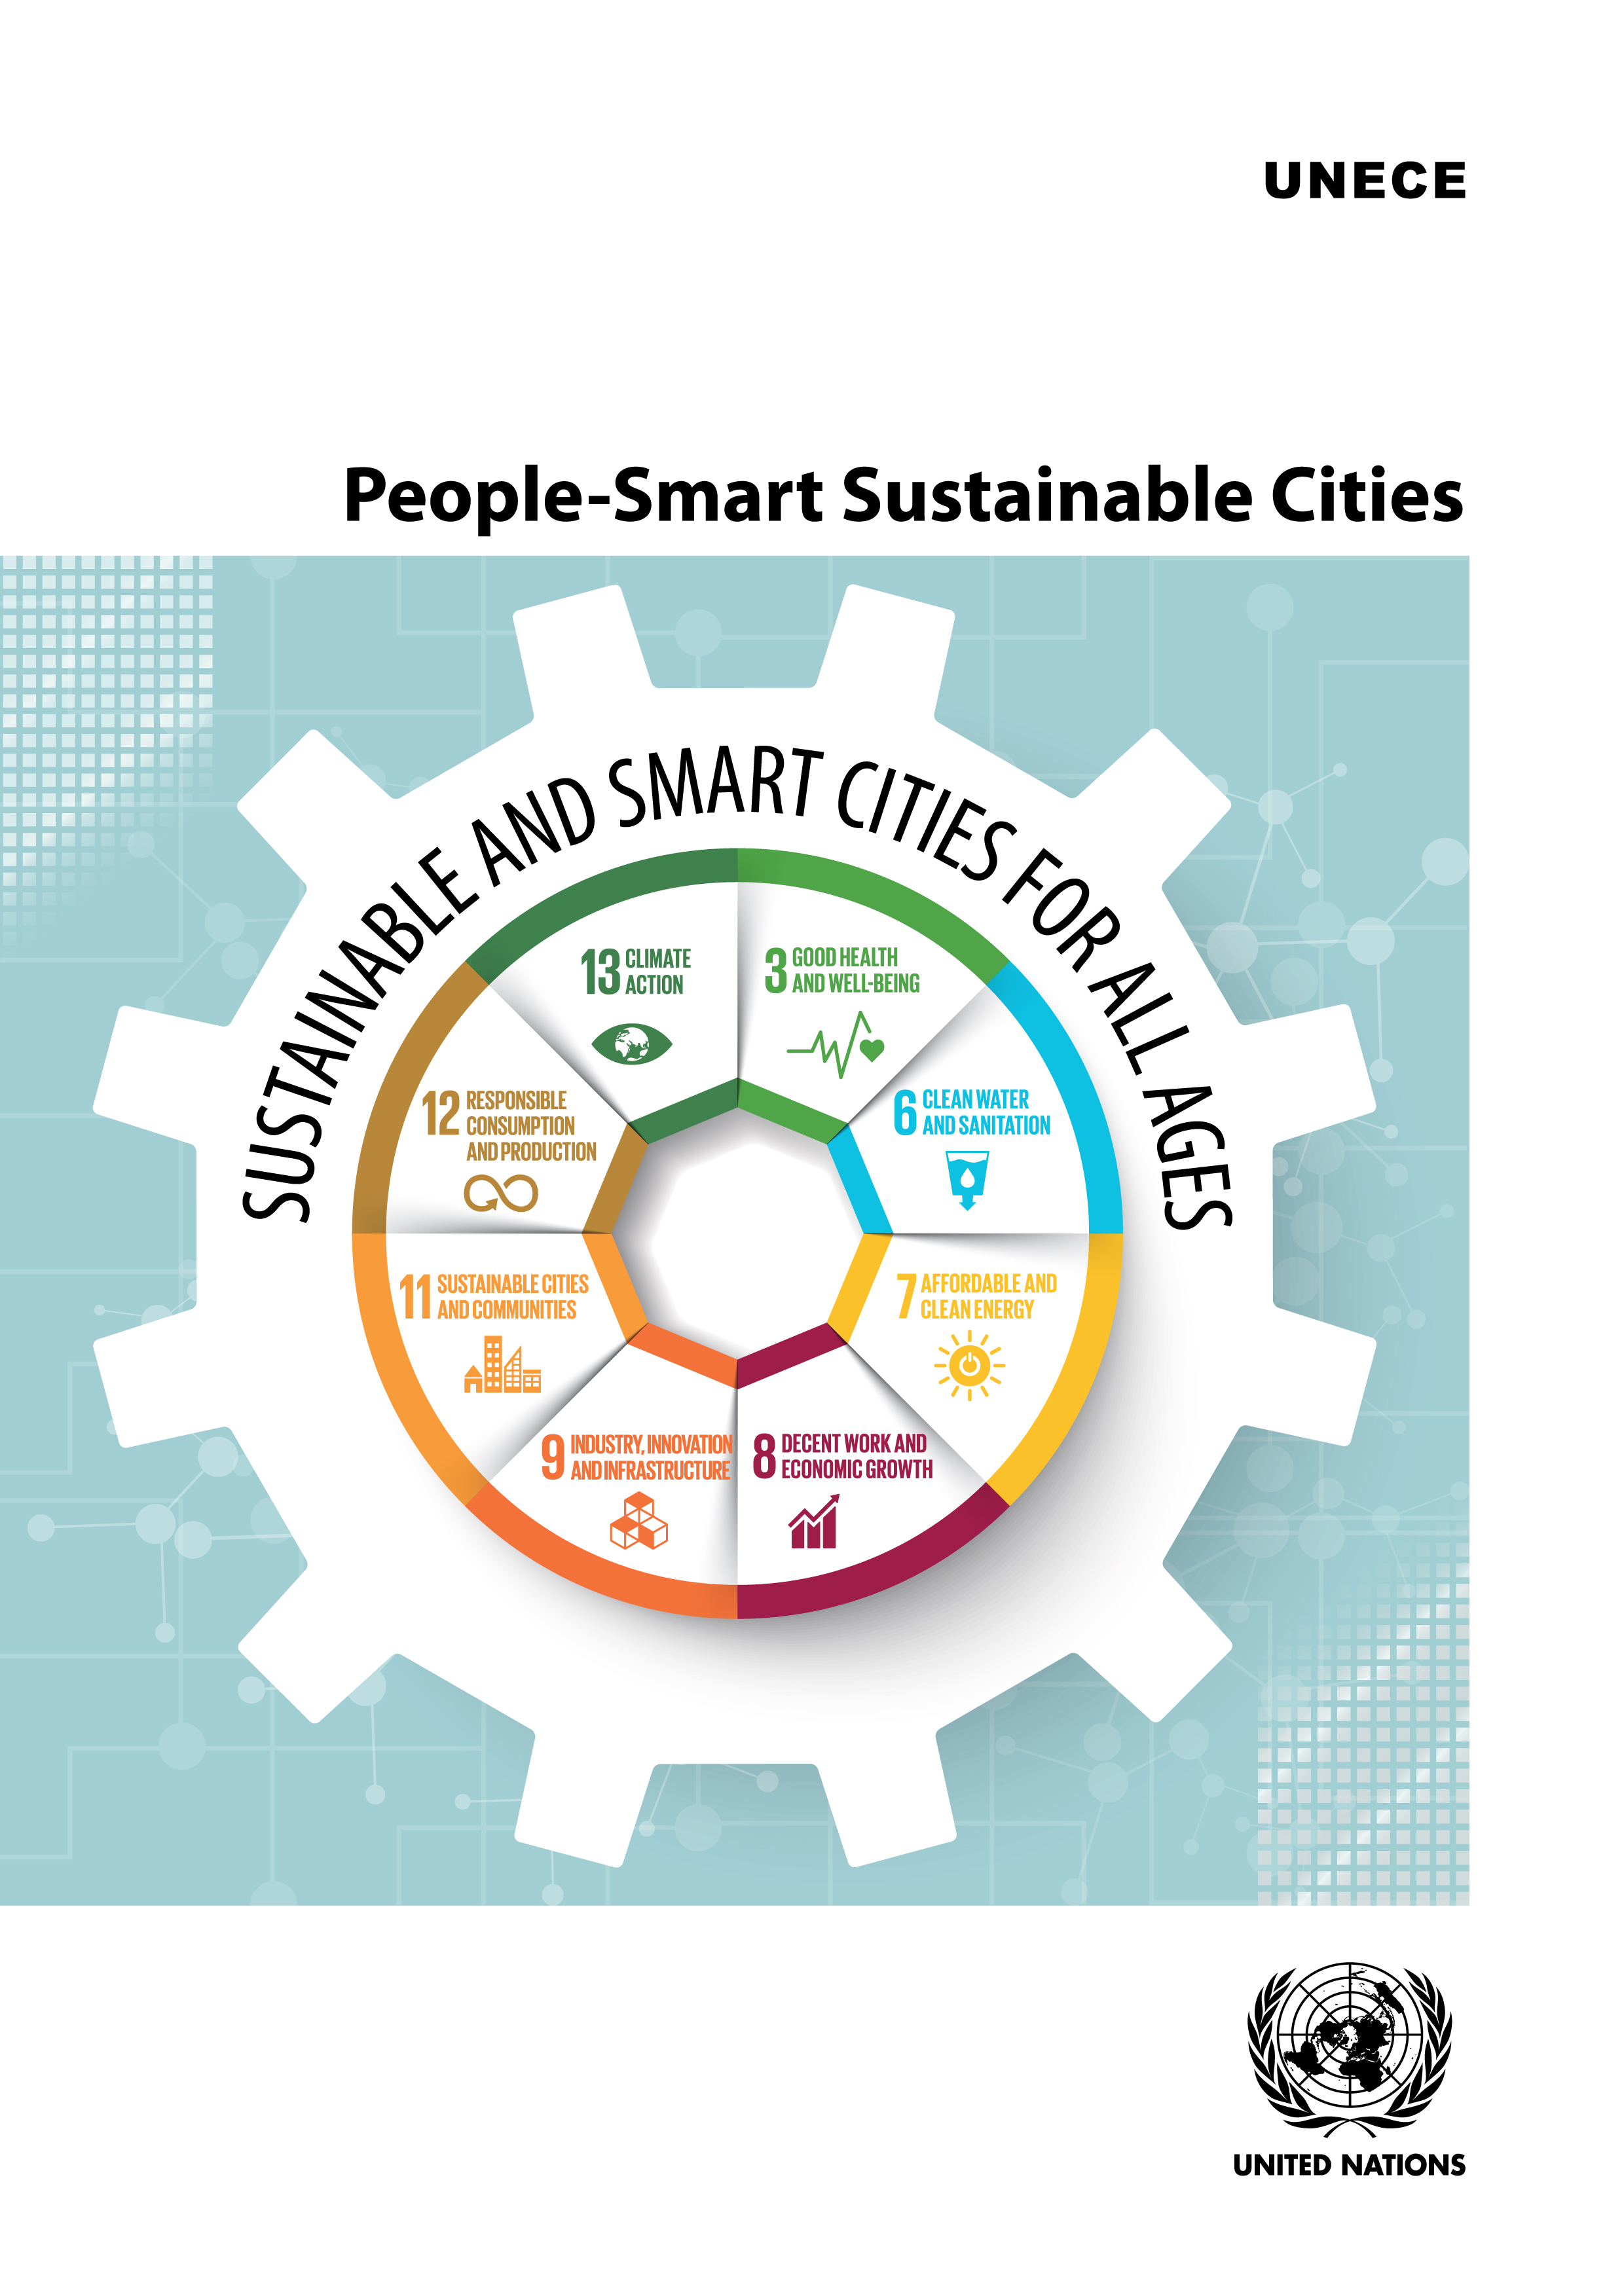 image of People-Smart Sustainable Cities